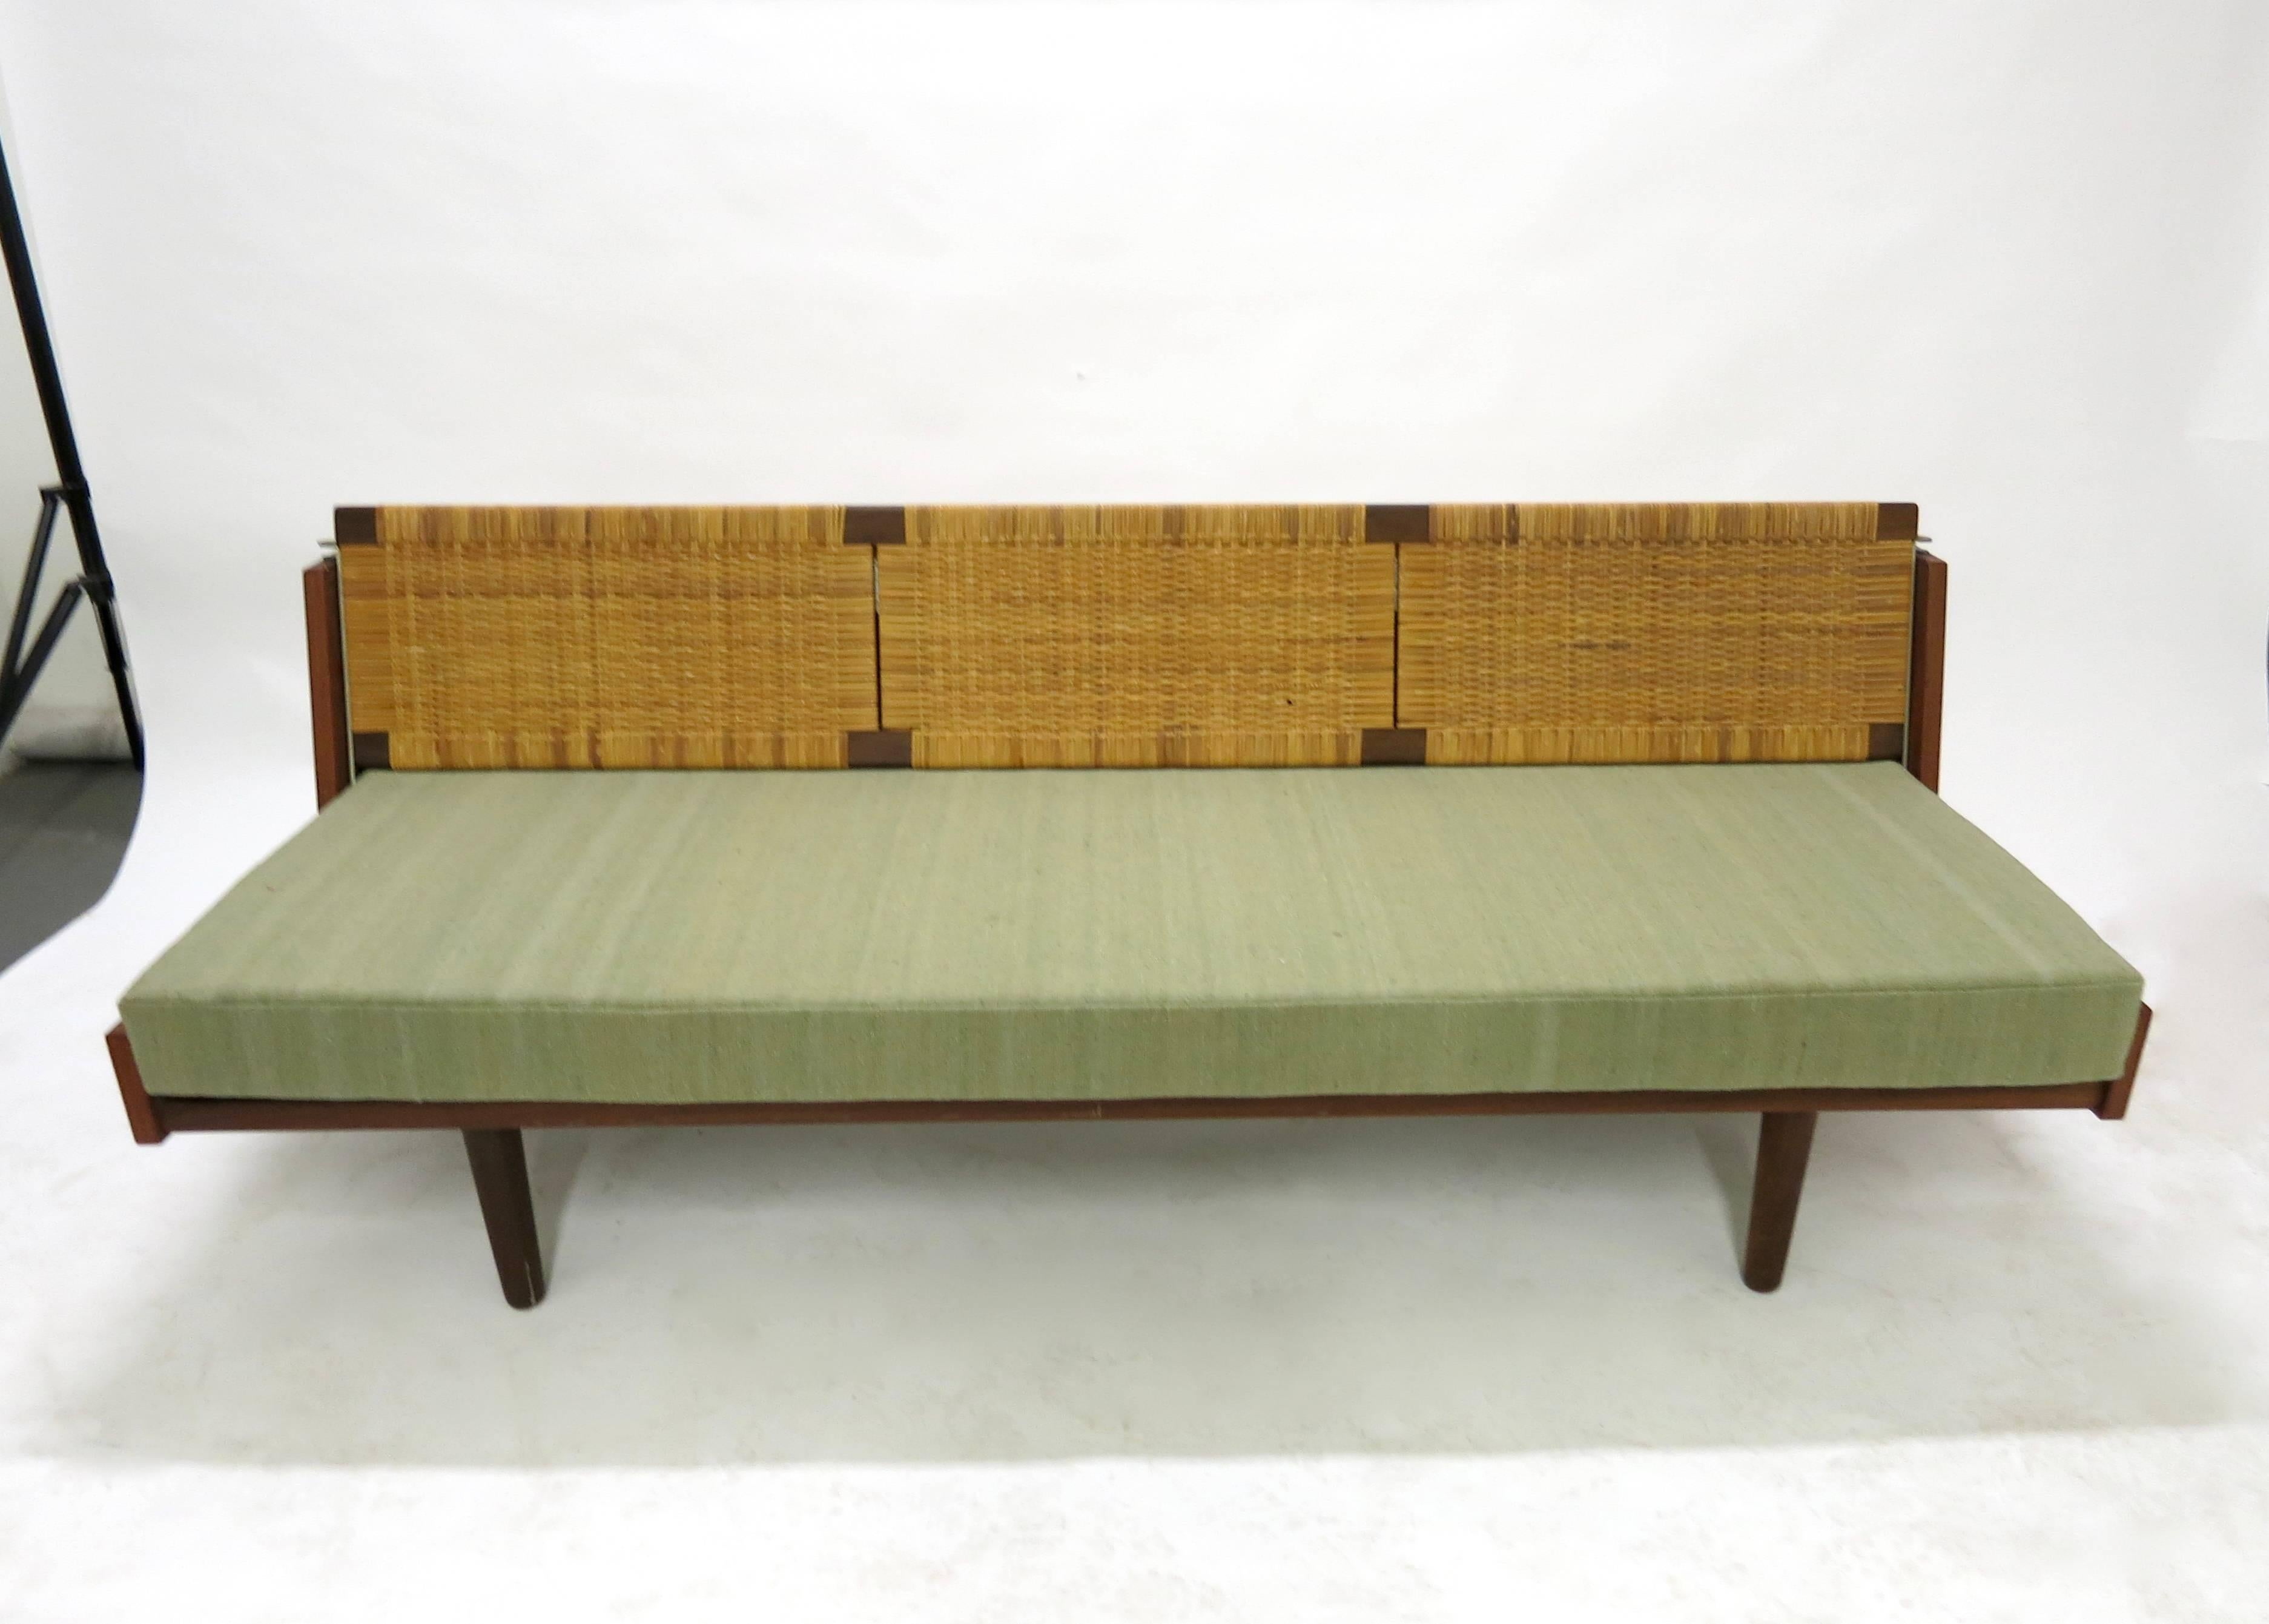 Mid-20th Century Daybed by Hans Wegner for GETAMA circa 1960 Made in Denmark